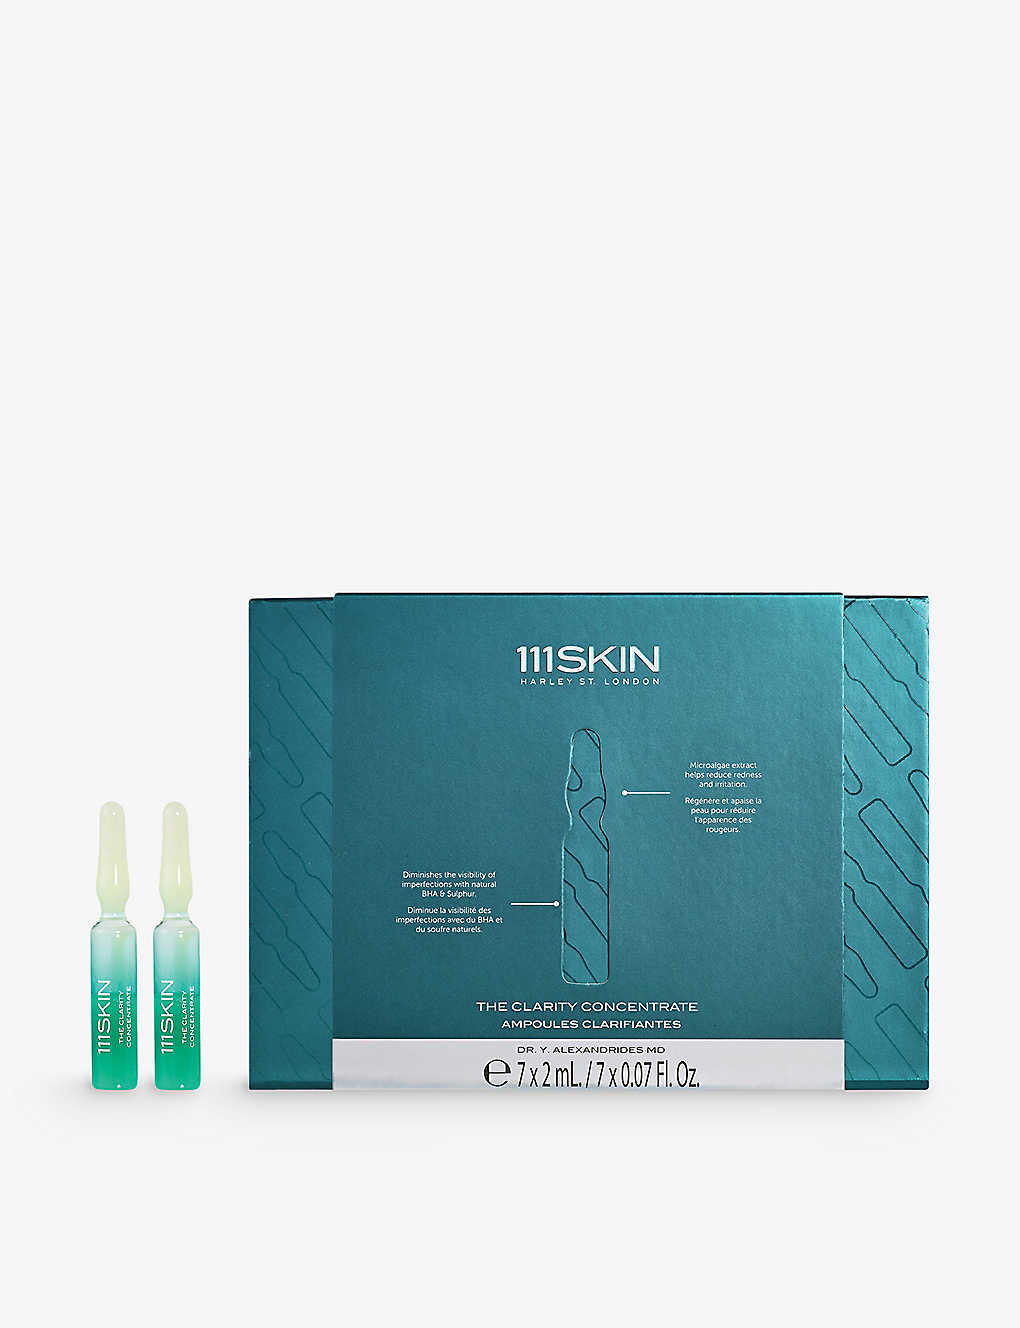 111skin The Clarity Concentrate Seven-day Treatment Programme